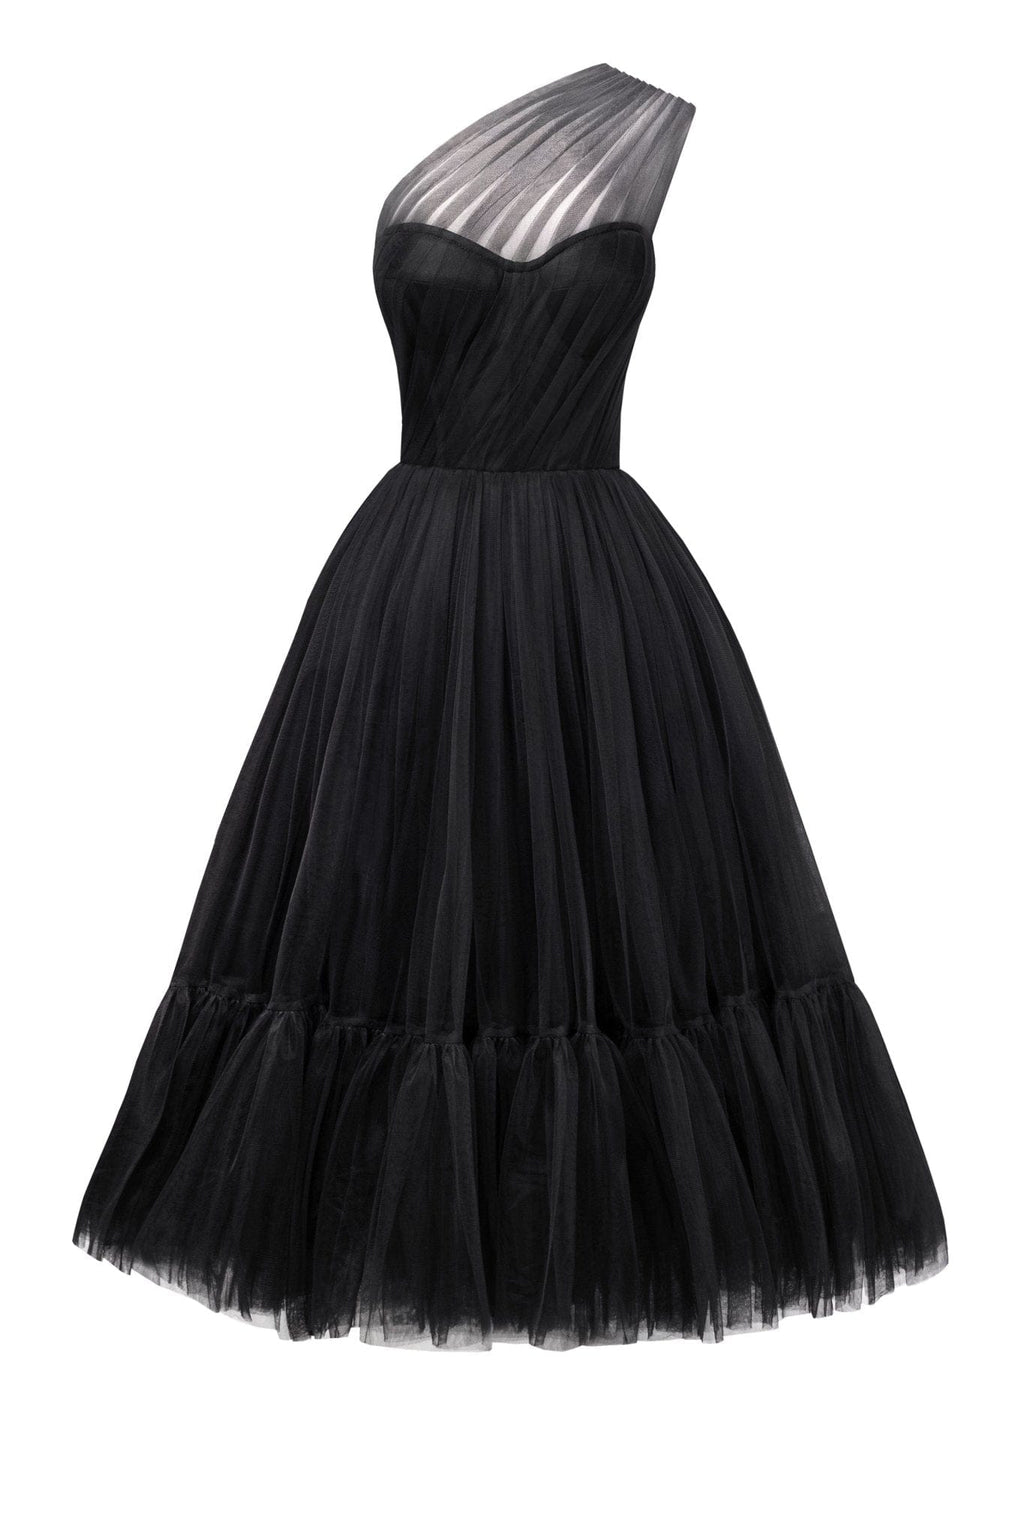 Vintage Little Black Dot Ball Gown Vintage Style Prom Dress With Backless  Design, V Neck, Hi Lo Sheath, And XS Cocktail Style From Newdeve, $92.76 |  DHgate.Com